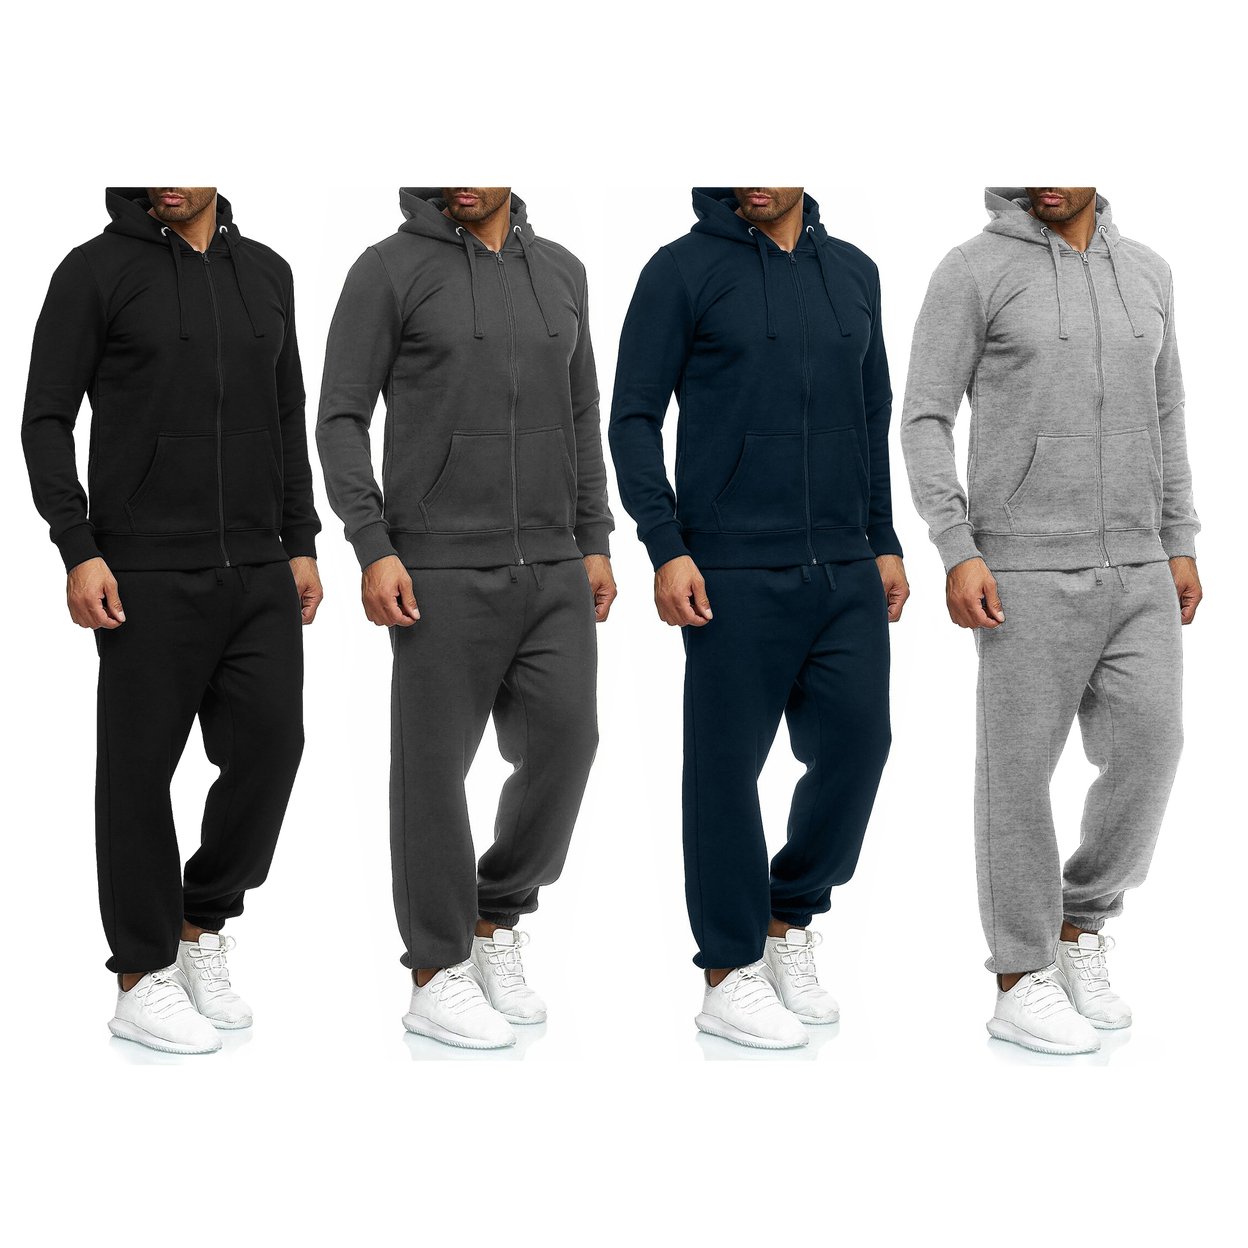 2-Pack: Men's Casual Big & Tall Athletic Active Winter Warm Fleece Lined Full Zip Tracksuit Jogger Set - Grey, Xx-large